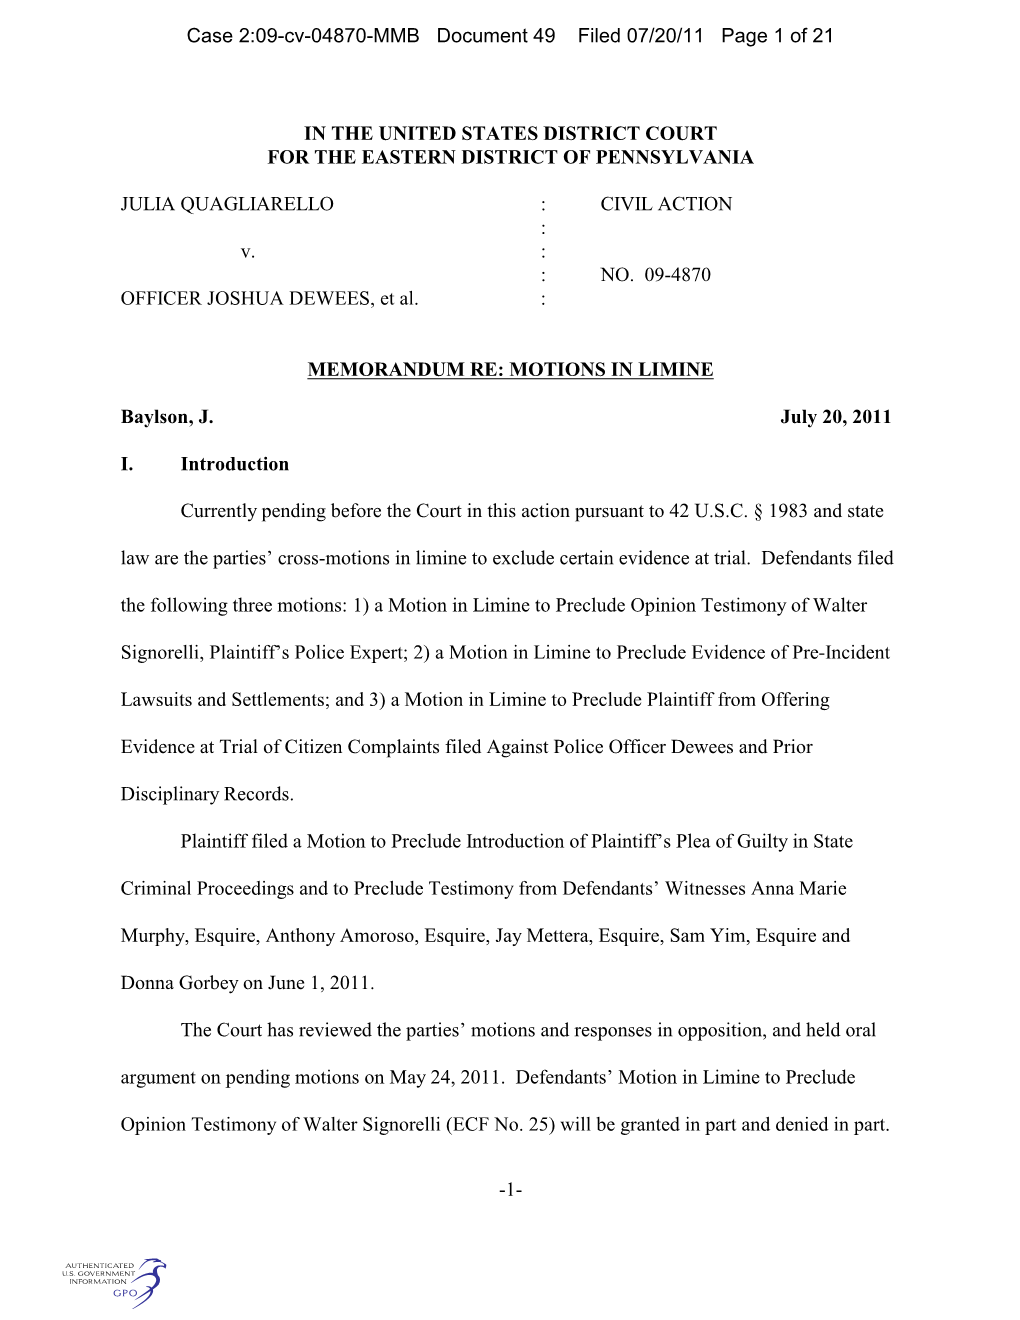 Case 2:09-Cv-04870-MMB Document 49 Filed 07/20/11 Page 1 of 21